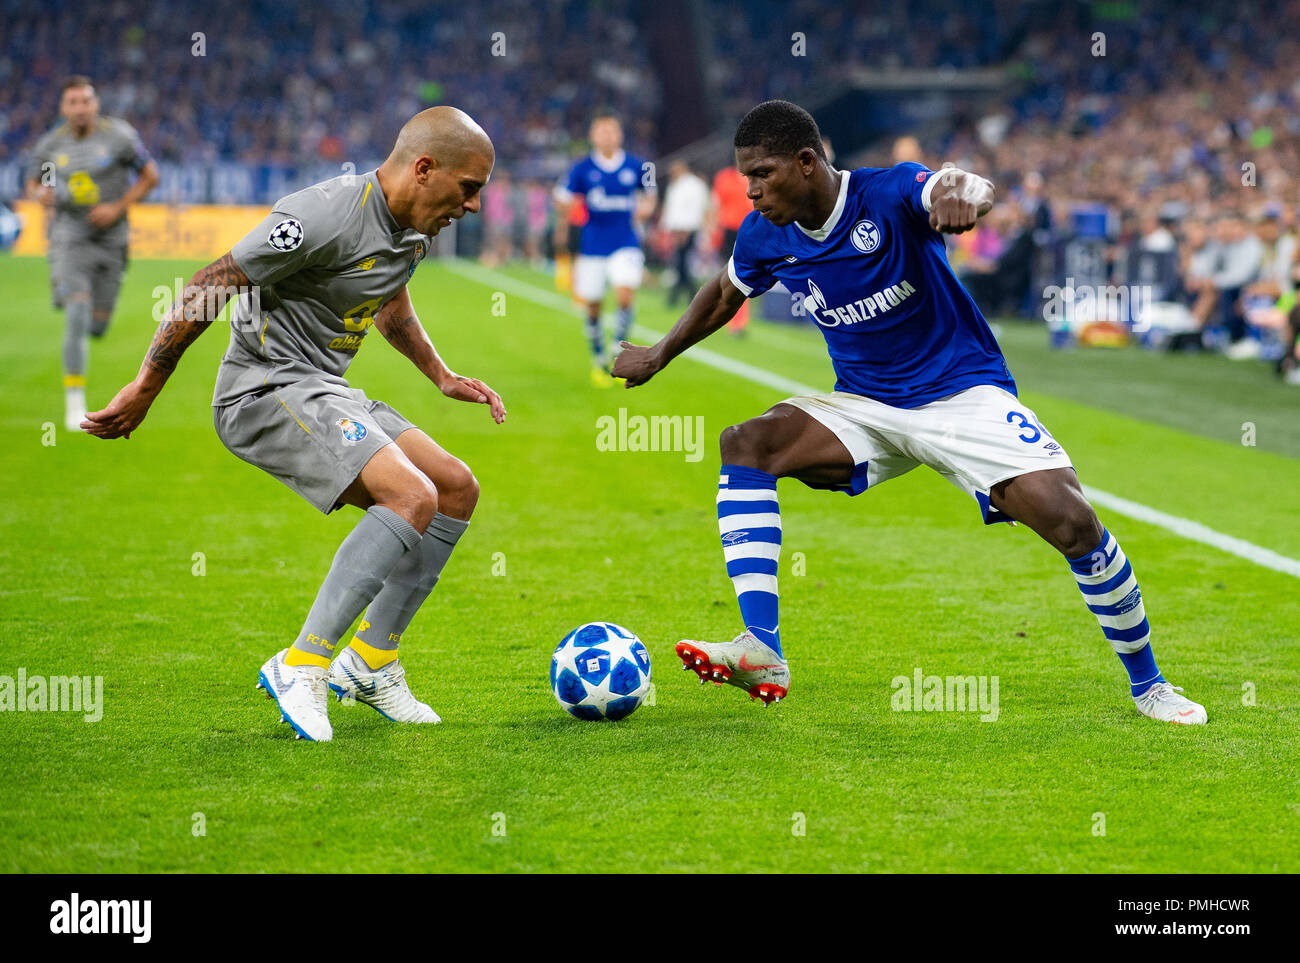 18 September 2018, North Rhine-Westphalia, Gelsenkirchen: Soccer: Champions League, FC Schalke 04 - FC Porto, Group stage, Group D, Matchday 1 in the Veltins Arena. Schalkes Breel Embolo (r) and Portos Maxi Pereira are fighting for the ball. Photo: Guido Kirchner/dpa Stock Photo